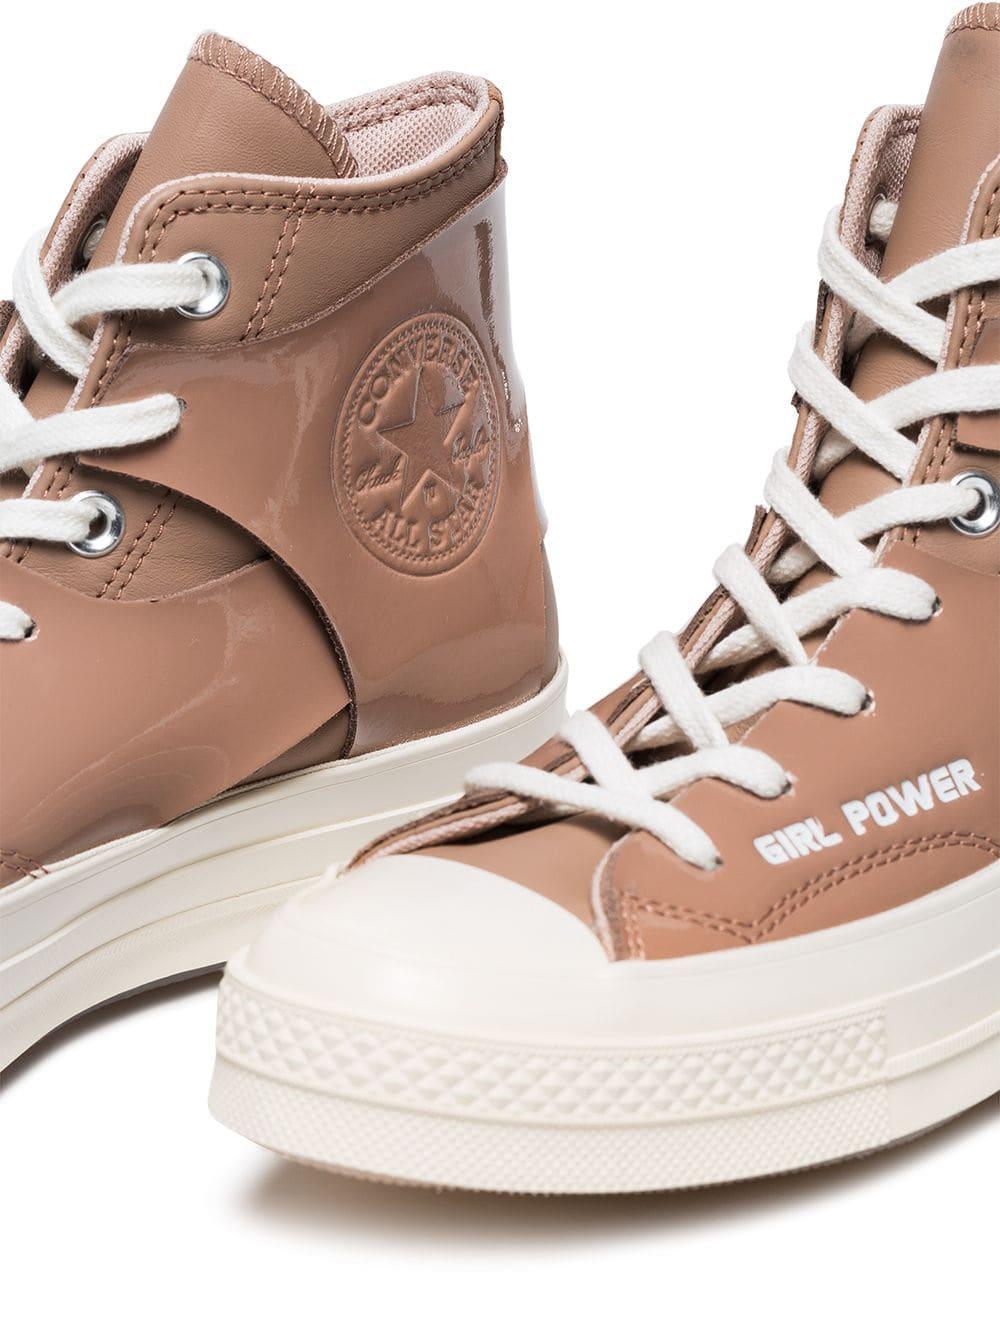 Converse Brown And White X Feng Chen Wang Chuck 70 Leather High Top  Sneakers - Lyst